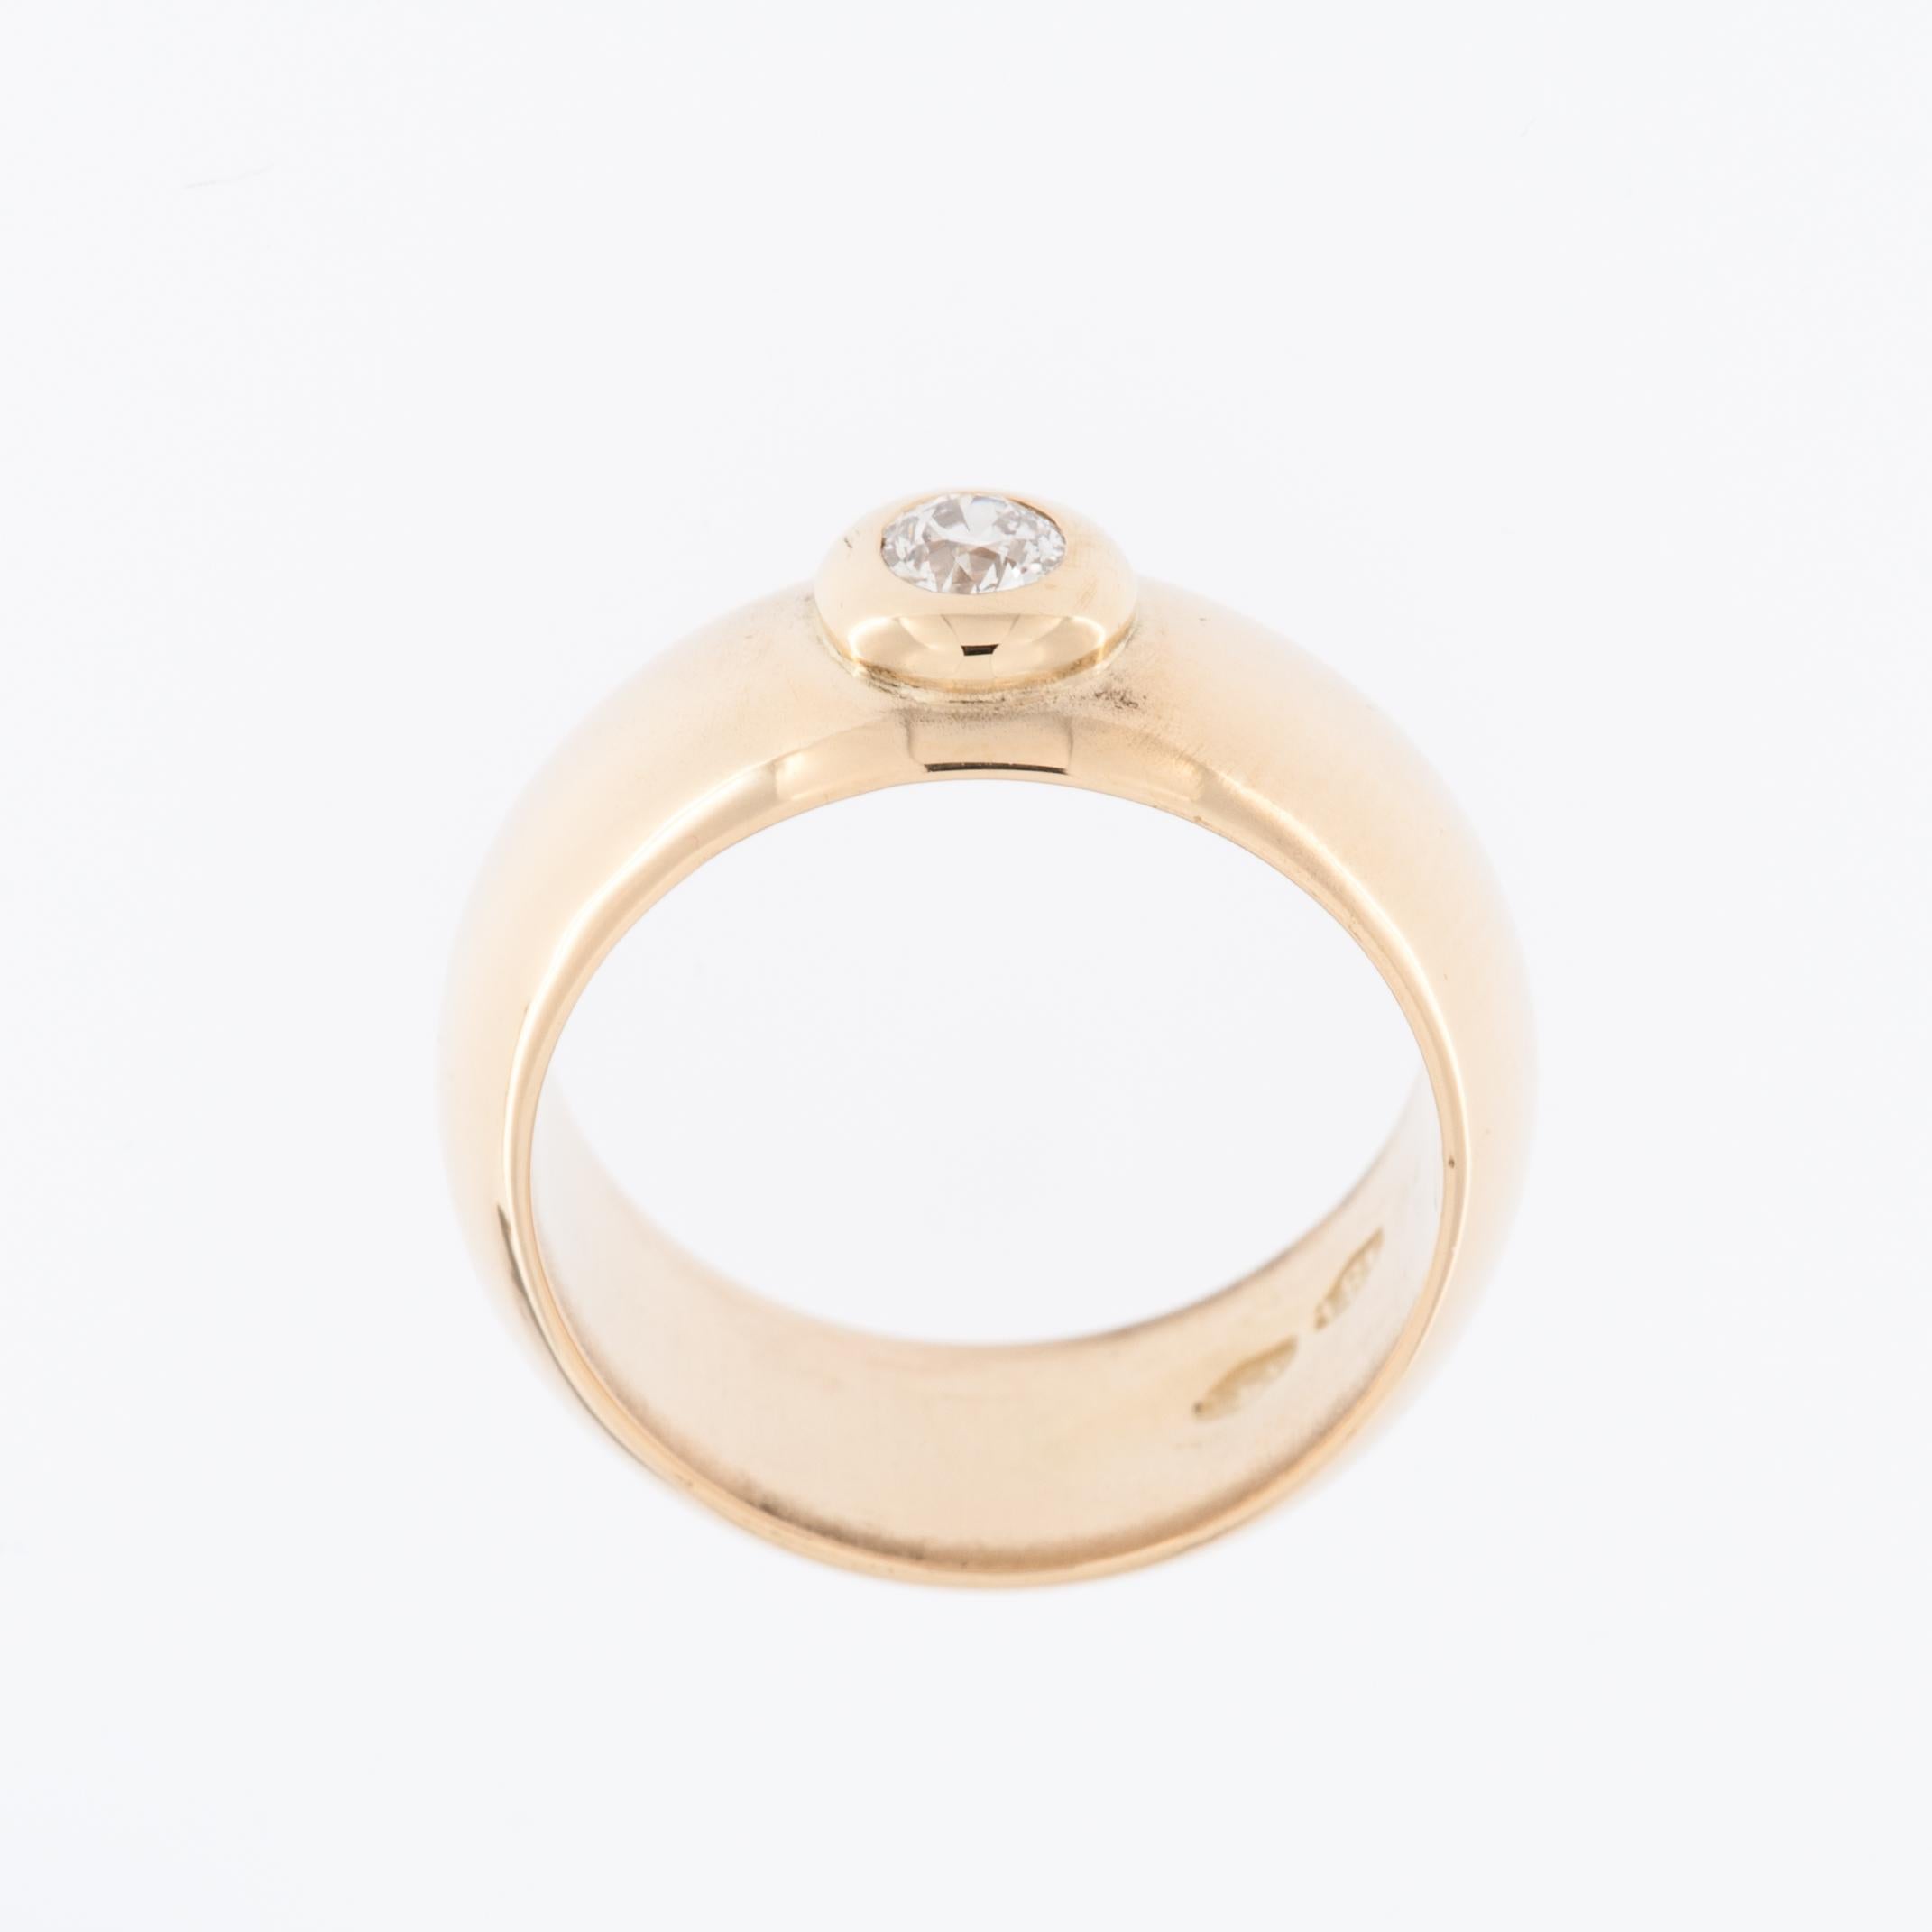 The Italian 18kt Yellow Gold Band Ring with Diamond bezel setting is a luxurious and elegant piece of jewelry.

The ring is crafted from high-quality 18-karat yellow gold, which is known for its rich, warm color and durability. Italian jewelry is